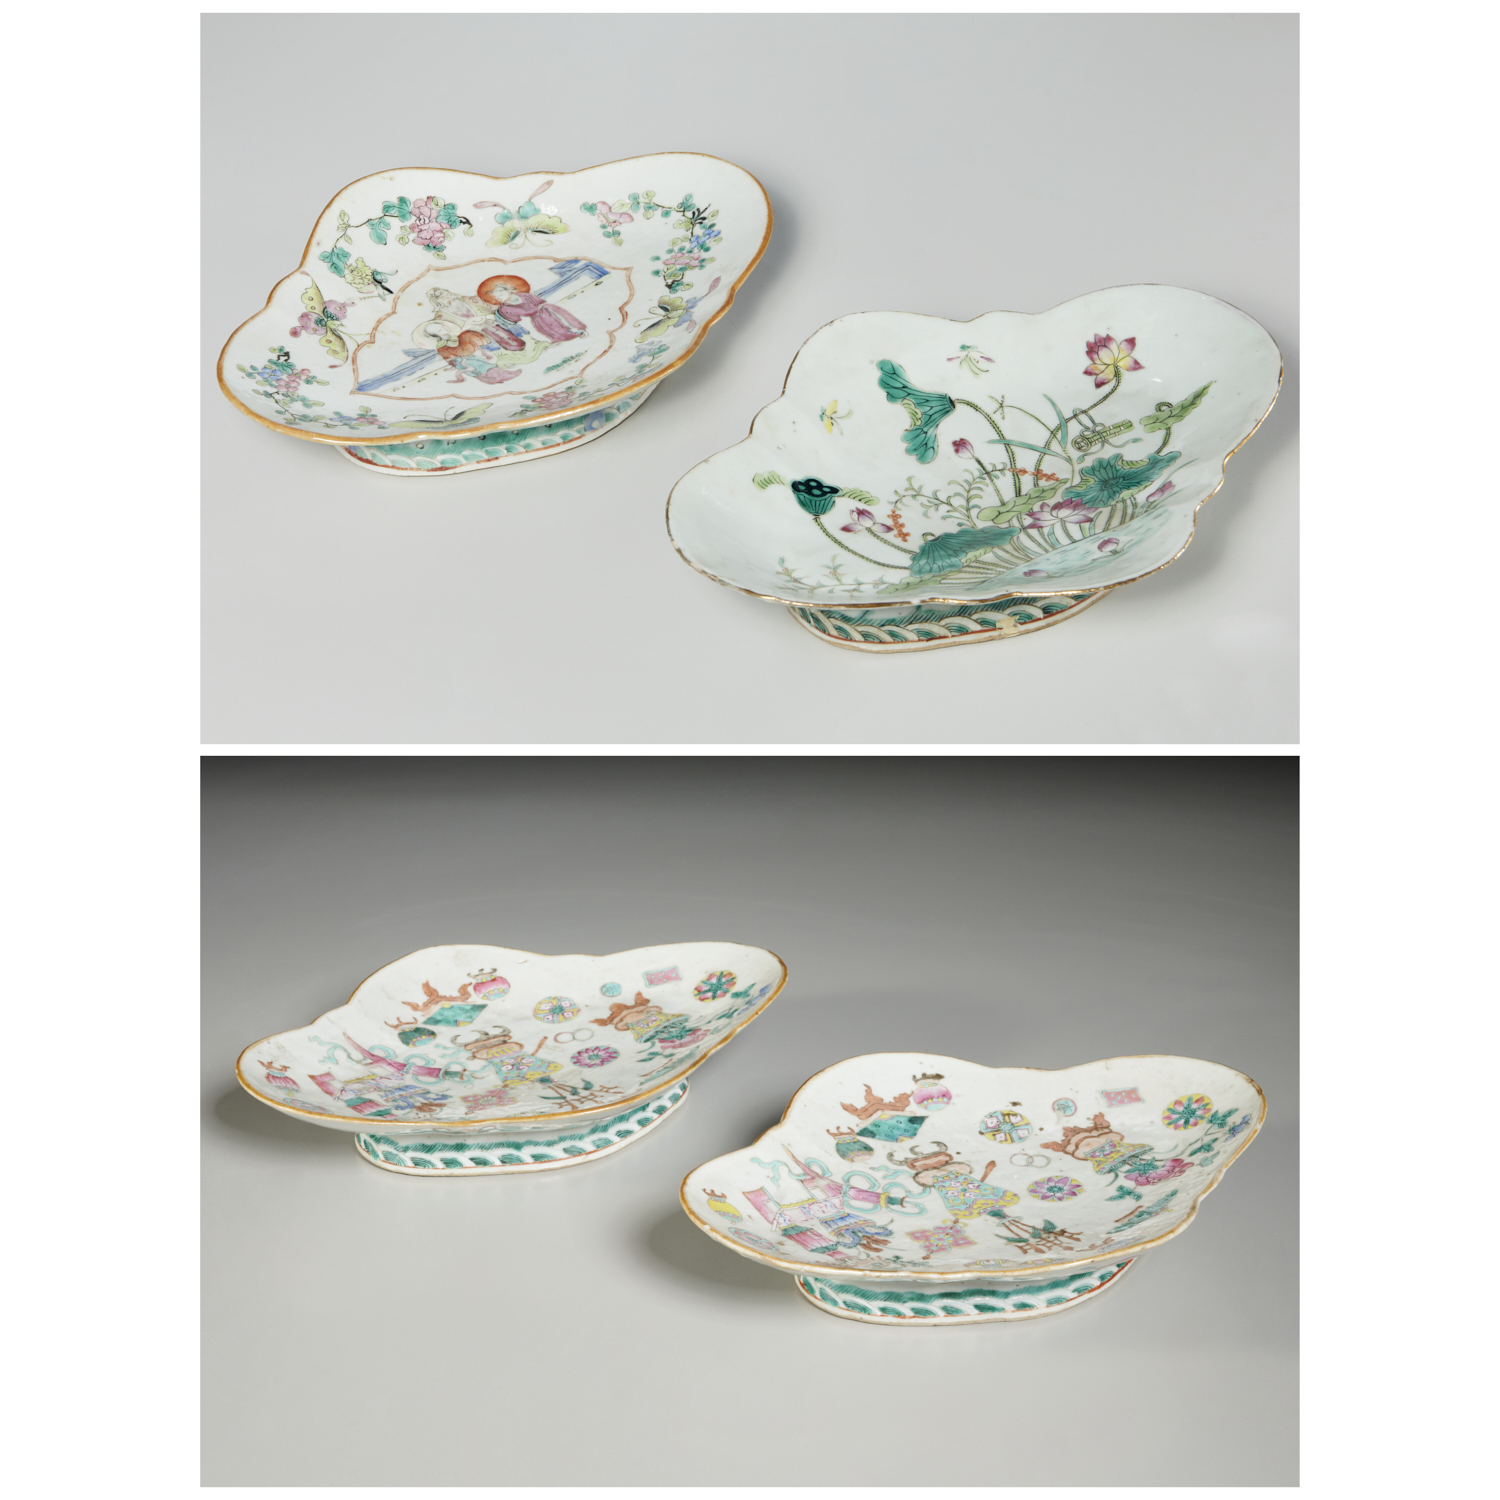  4 CHINESE FAMILLE ROSE PORCELAIN 3611d5